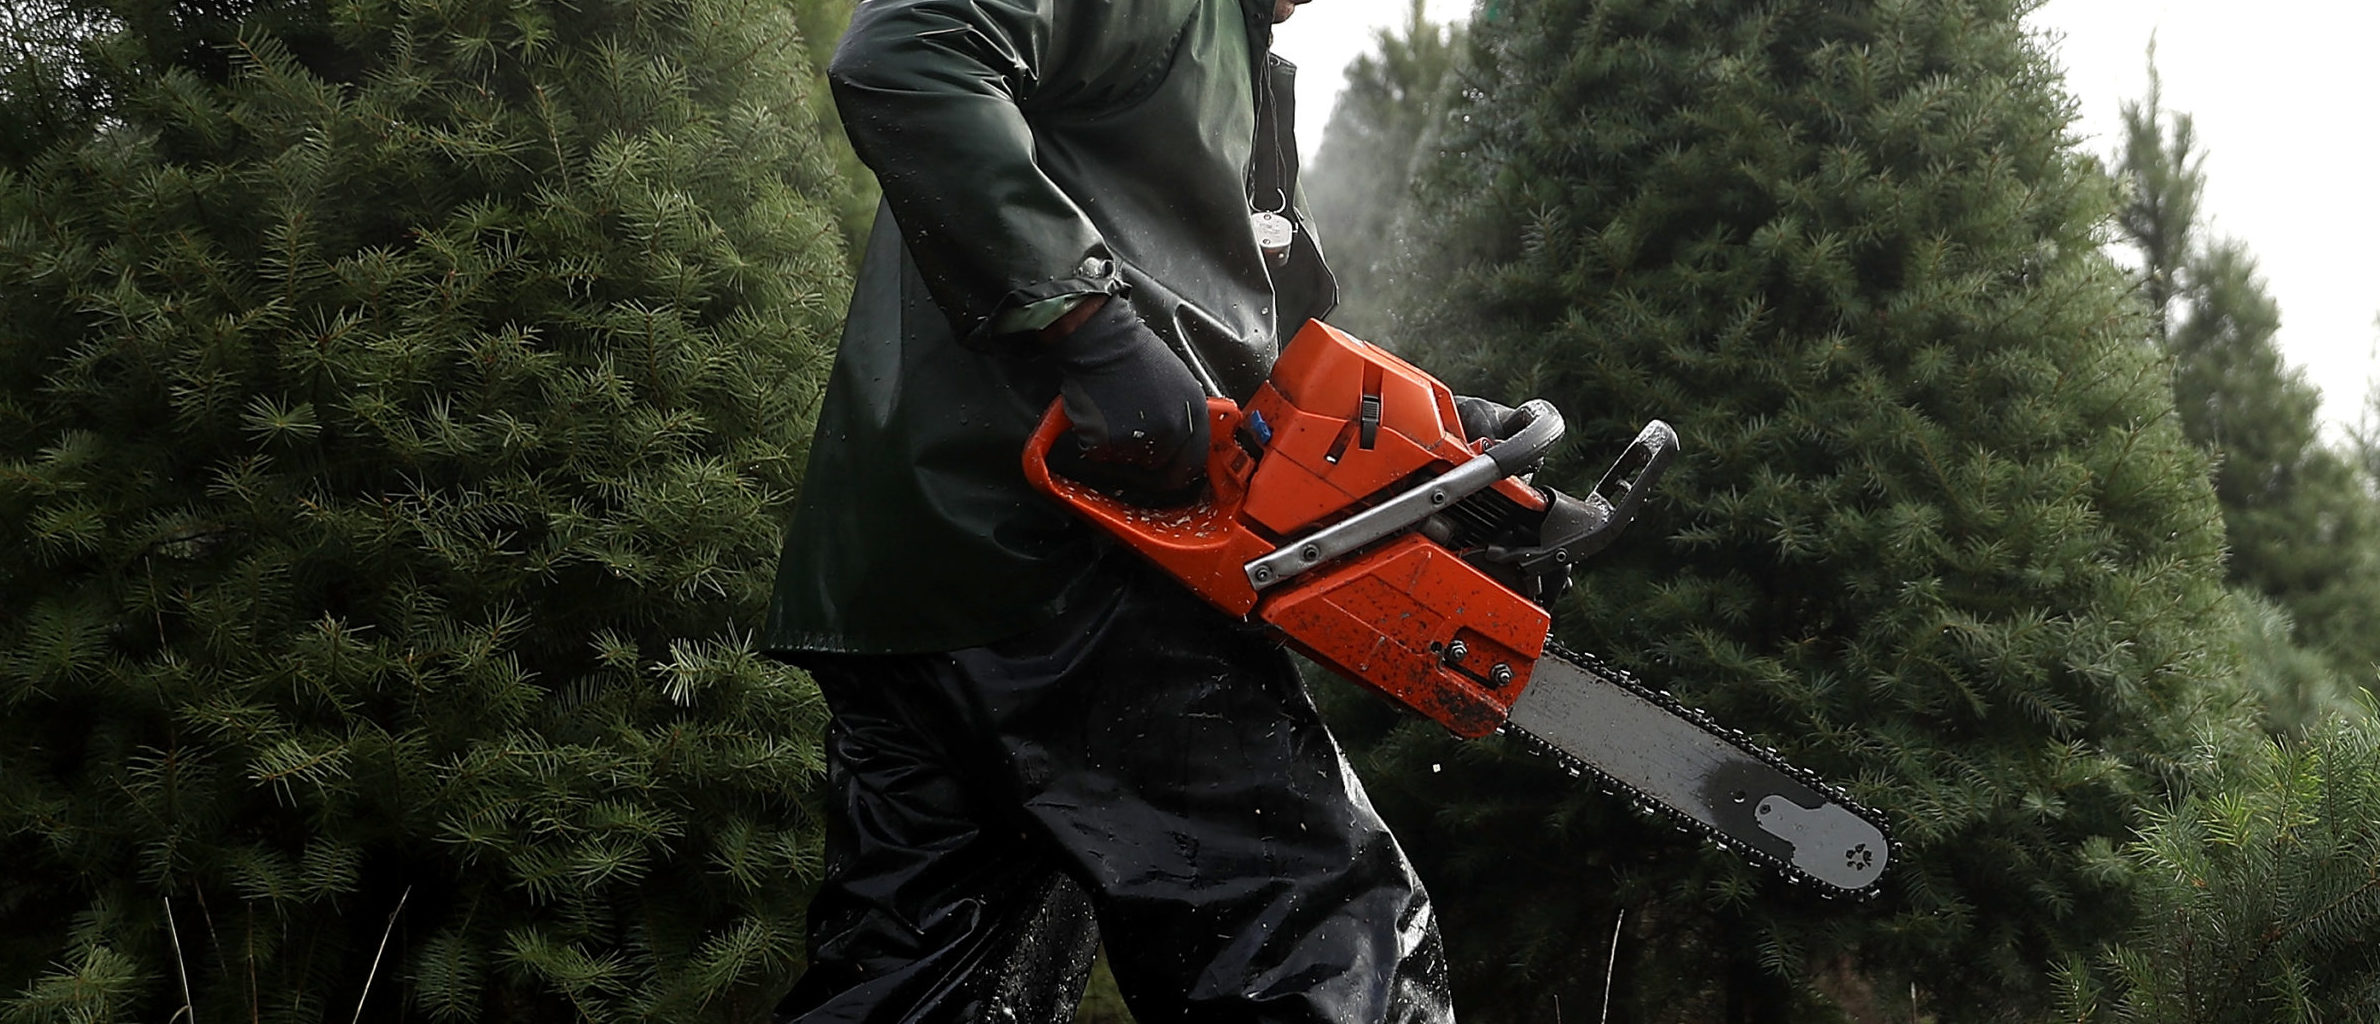 MONROE, OR - NOVEMBER 18: Workers use chainsaws to cut down Douglas Fir Christmas trees at the Holiday Tree Farms on November 18, 2017 in Monroe, Oregon. The Christmas tree harvest is underway at Holiday Tree Farms, the biggest grower of holiday trees in the United States, as workers harvest and ship an estimated one million trees ahead of the Christmas holiday. (Photo by Justin Sullivan/Getty Images)